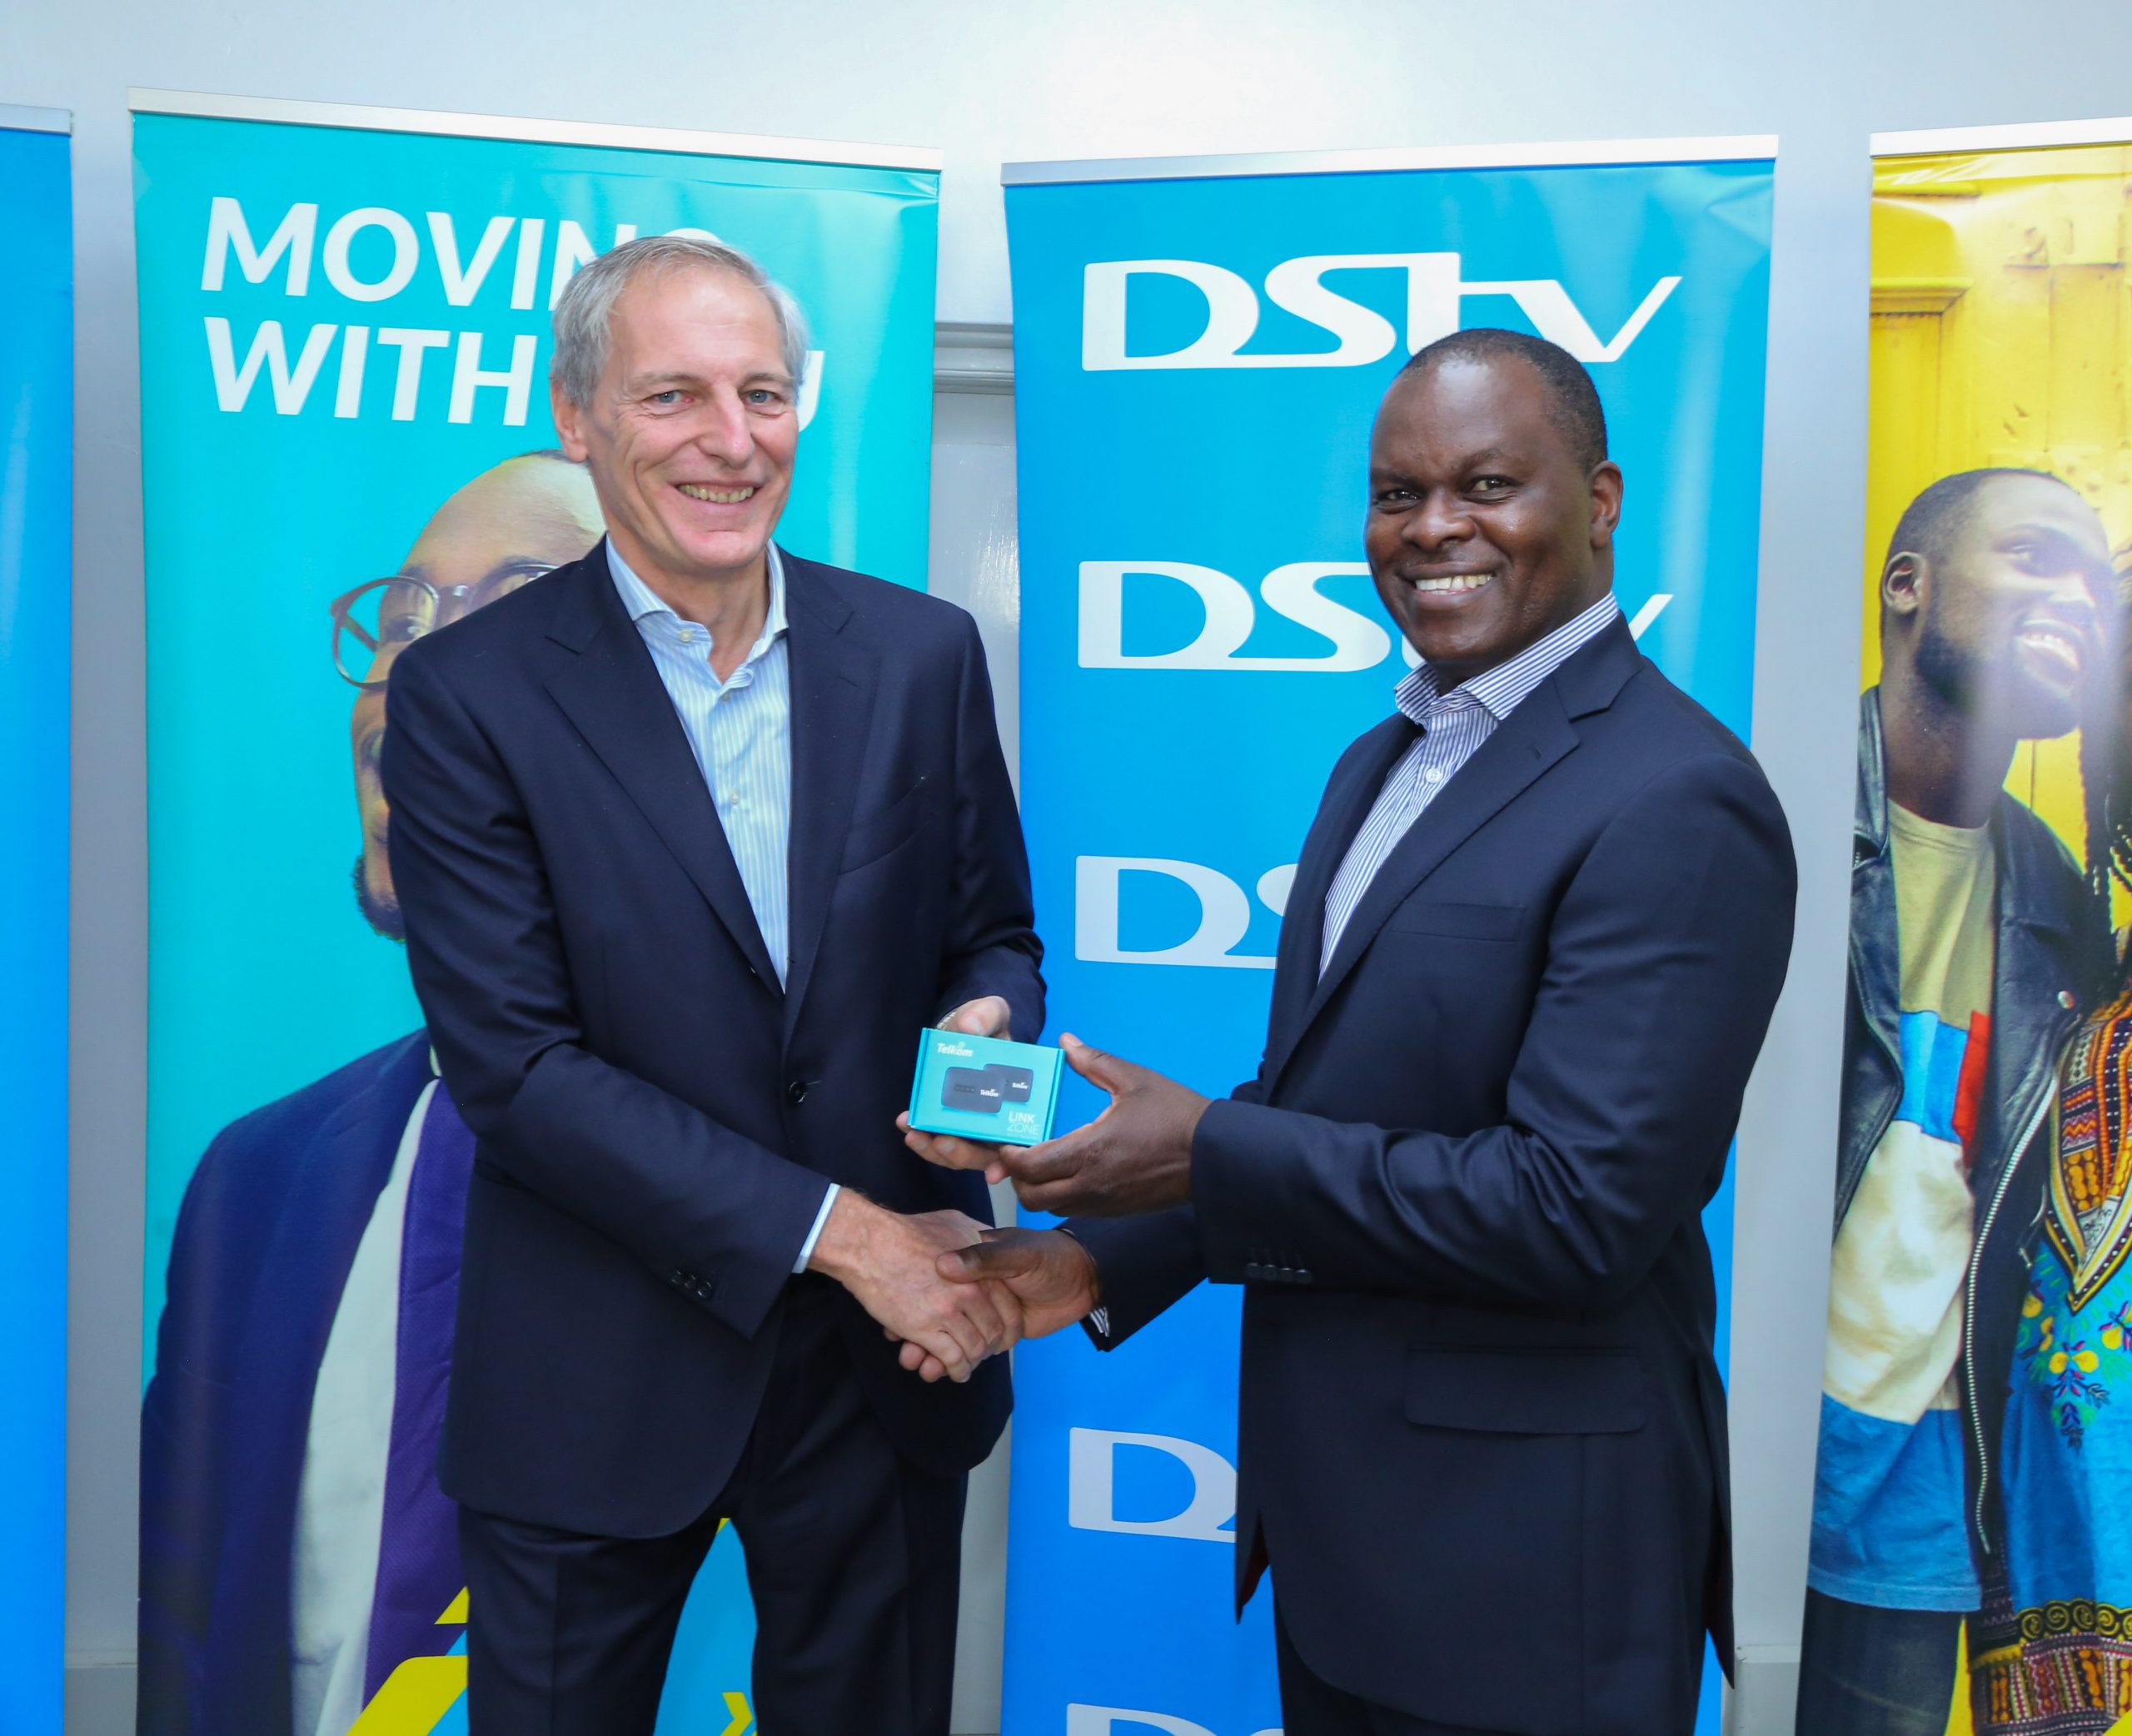 (Left) Aldo Mareuse, Telkom Chief Executive Officer and Eric Odipo